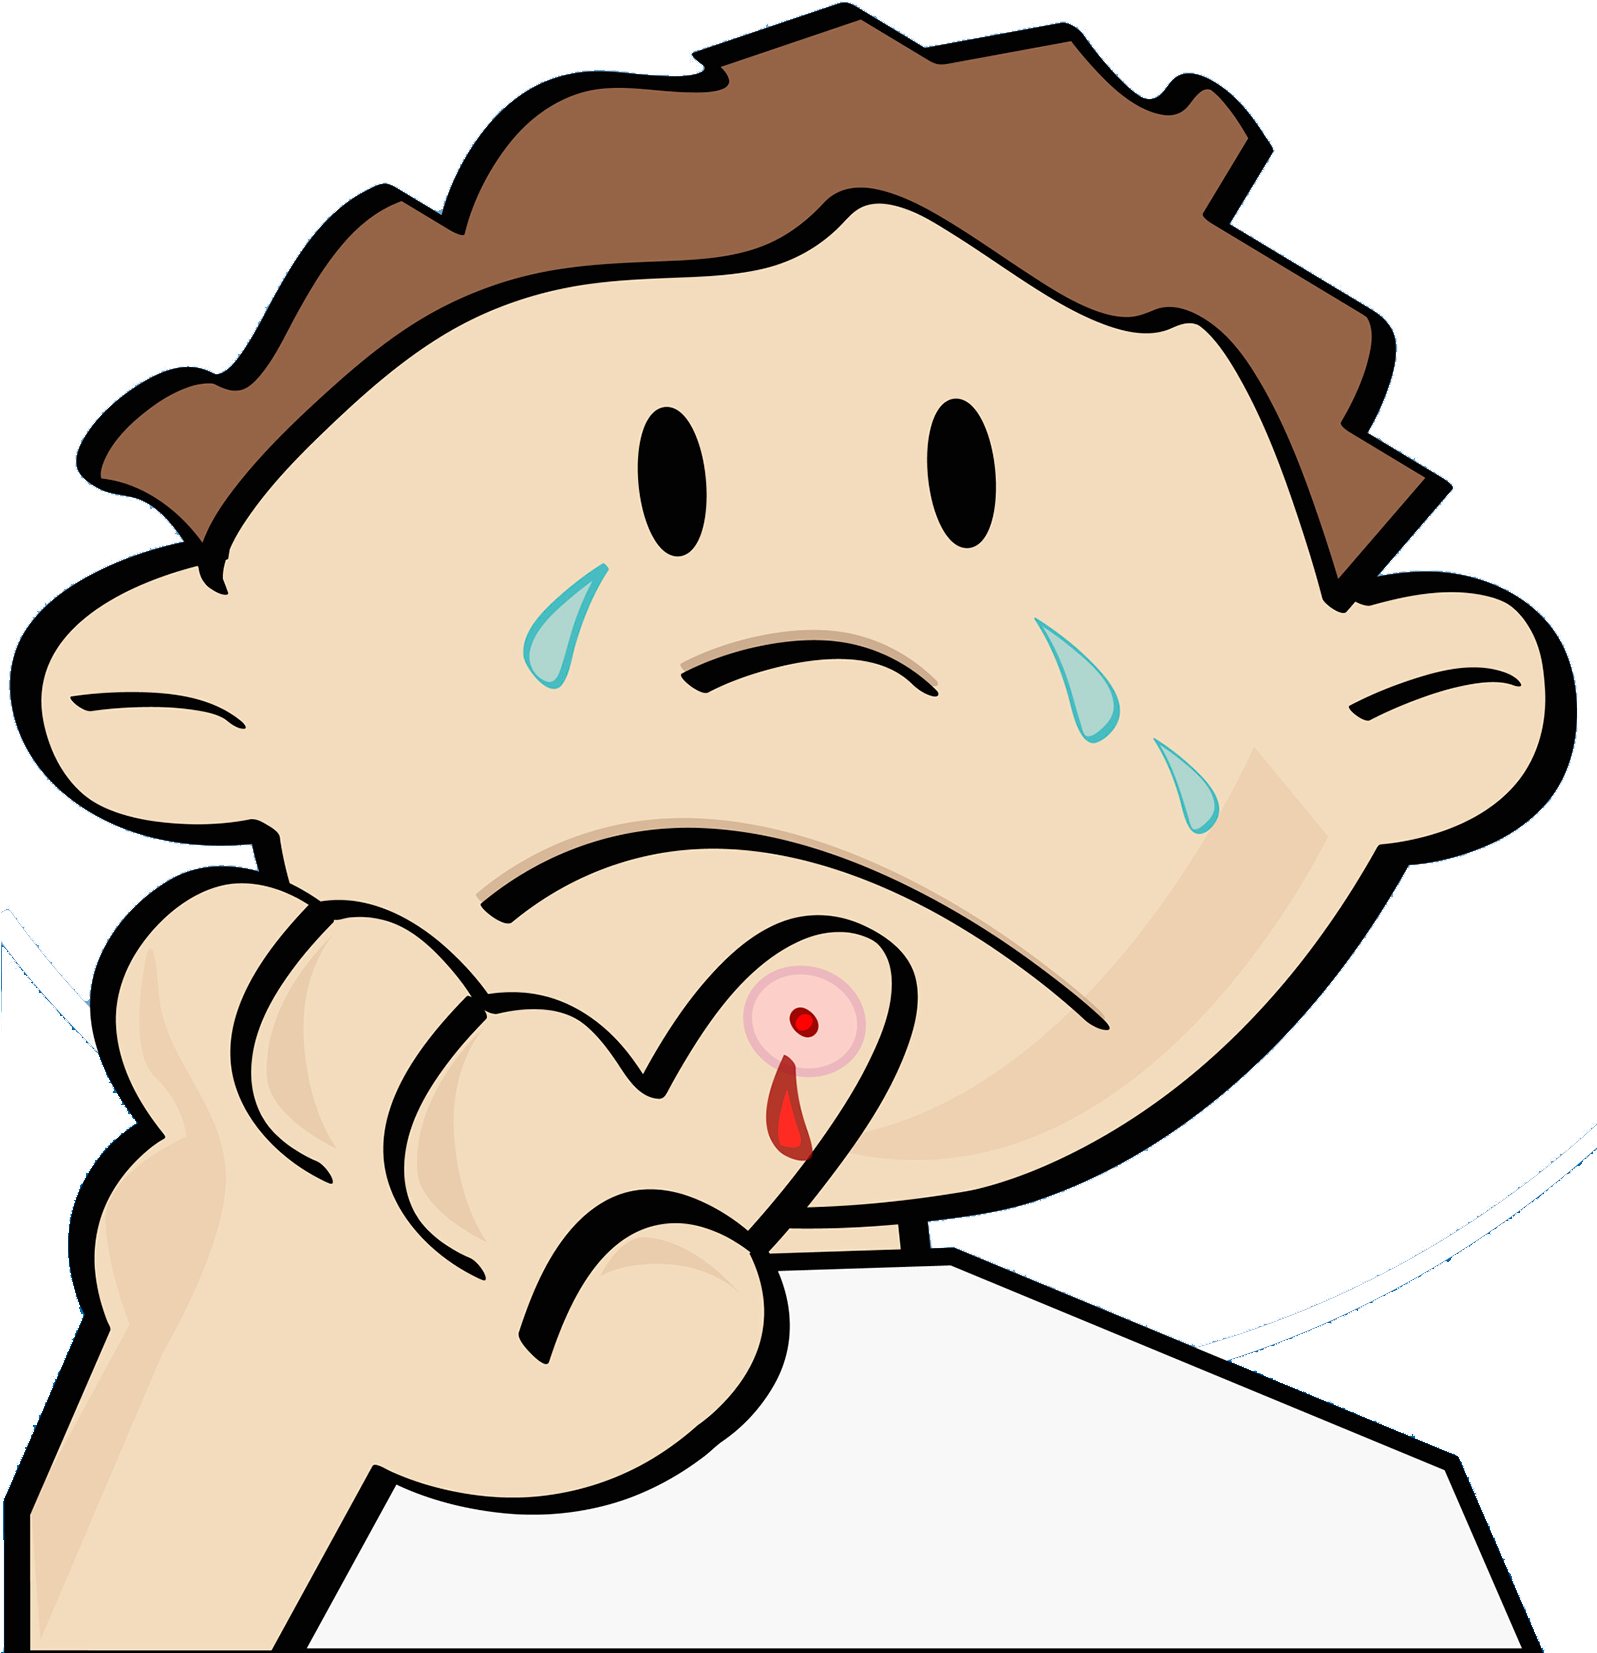 Download and share clipart about Crying Cartoon Illustration - Cartoon Boy Crying...